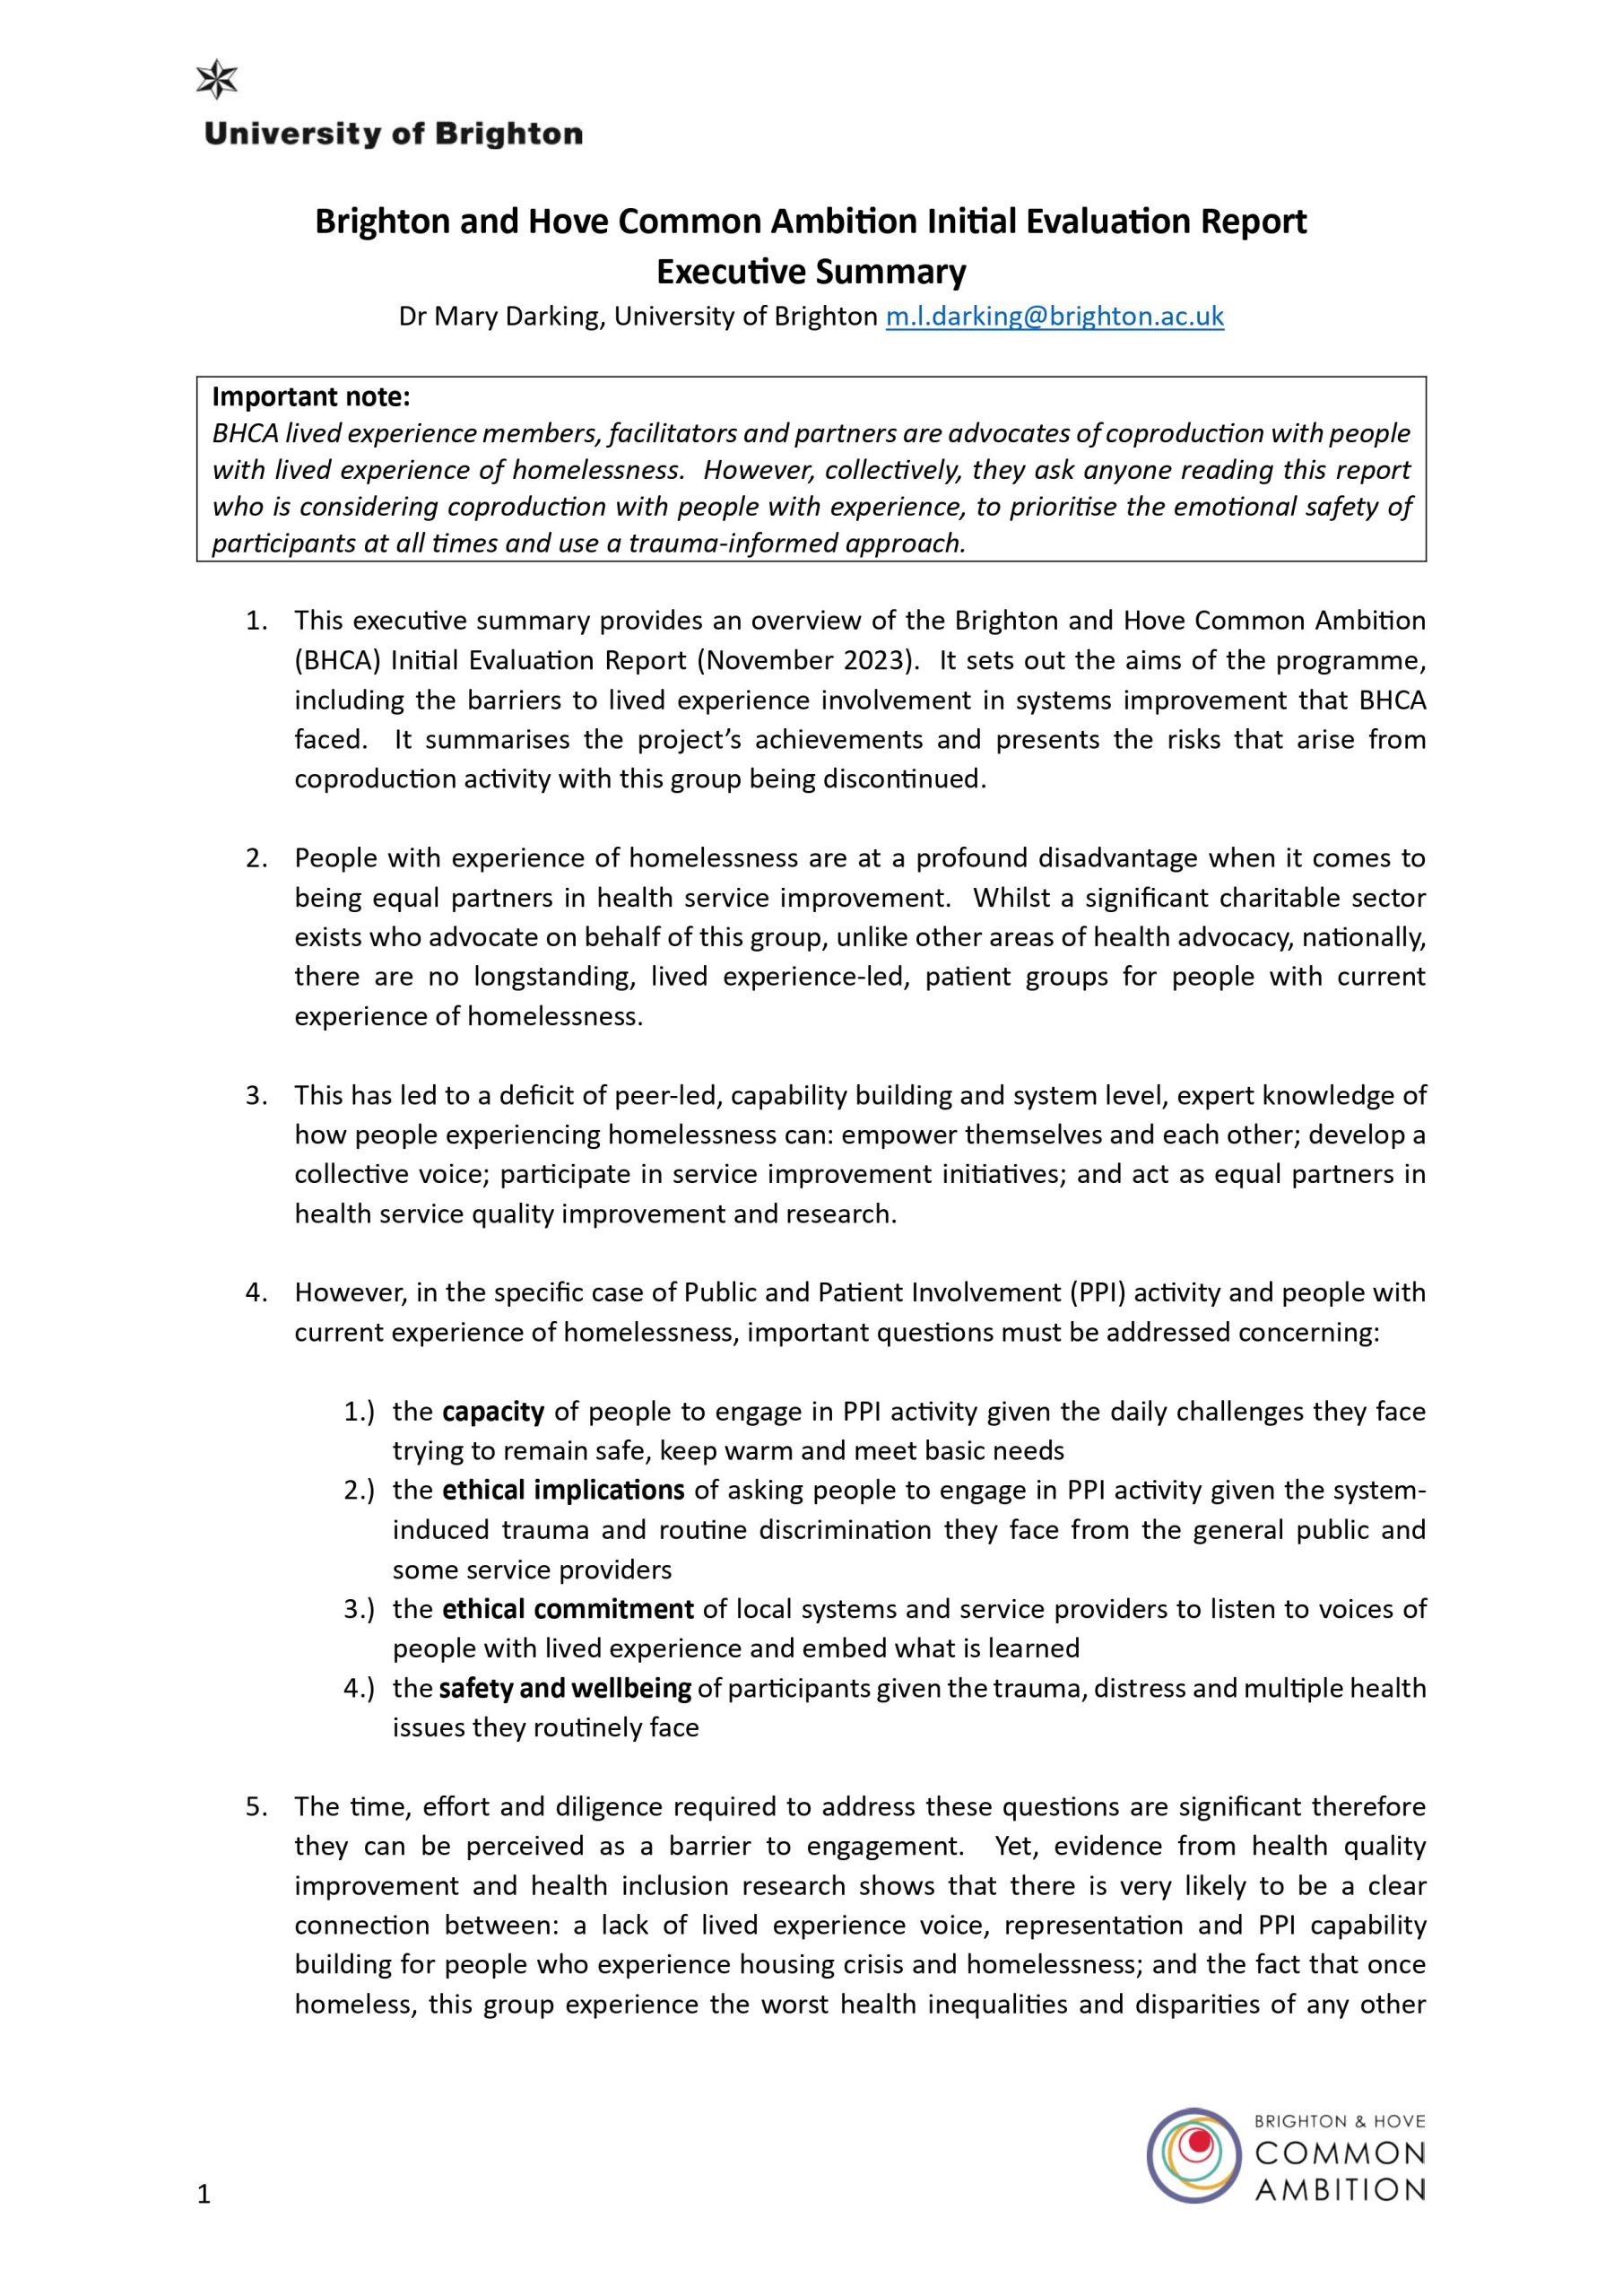 Initial Evaluation Exec Summary Page 1